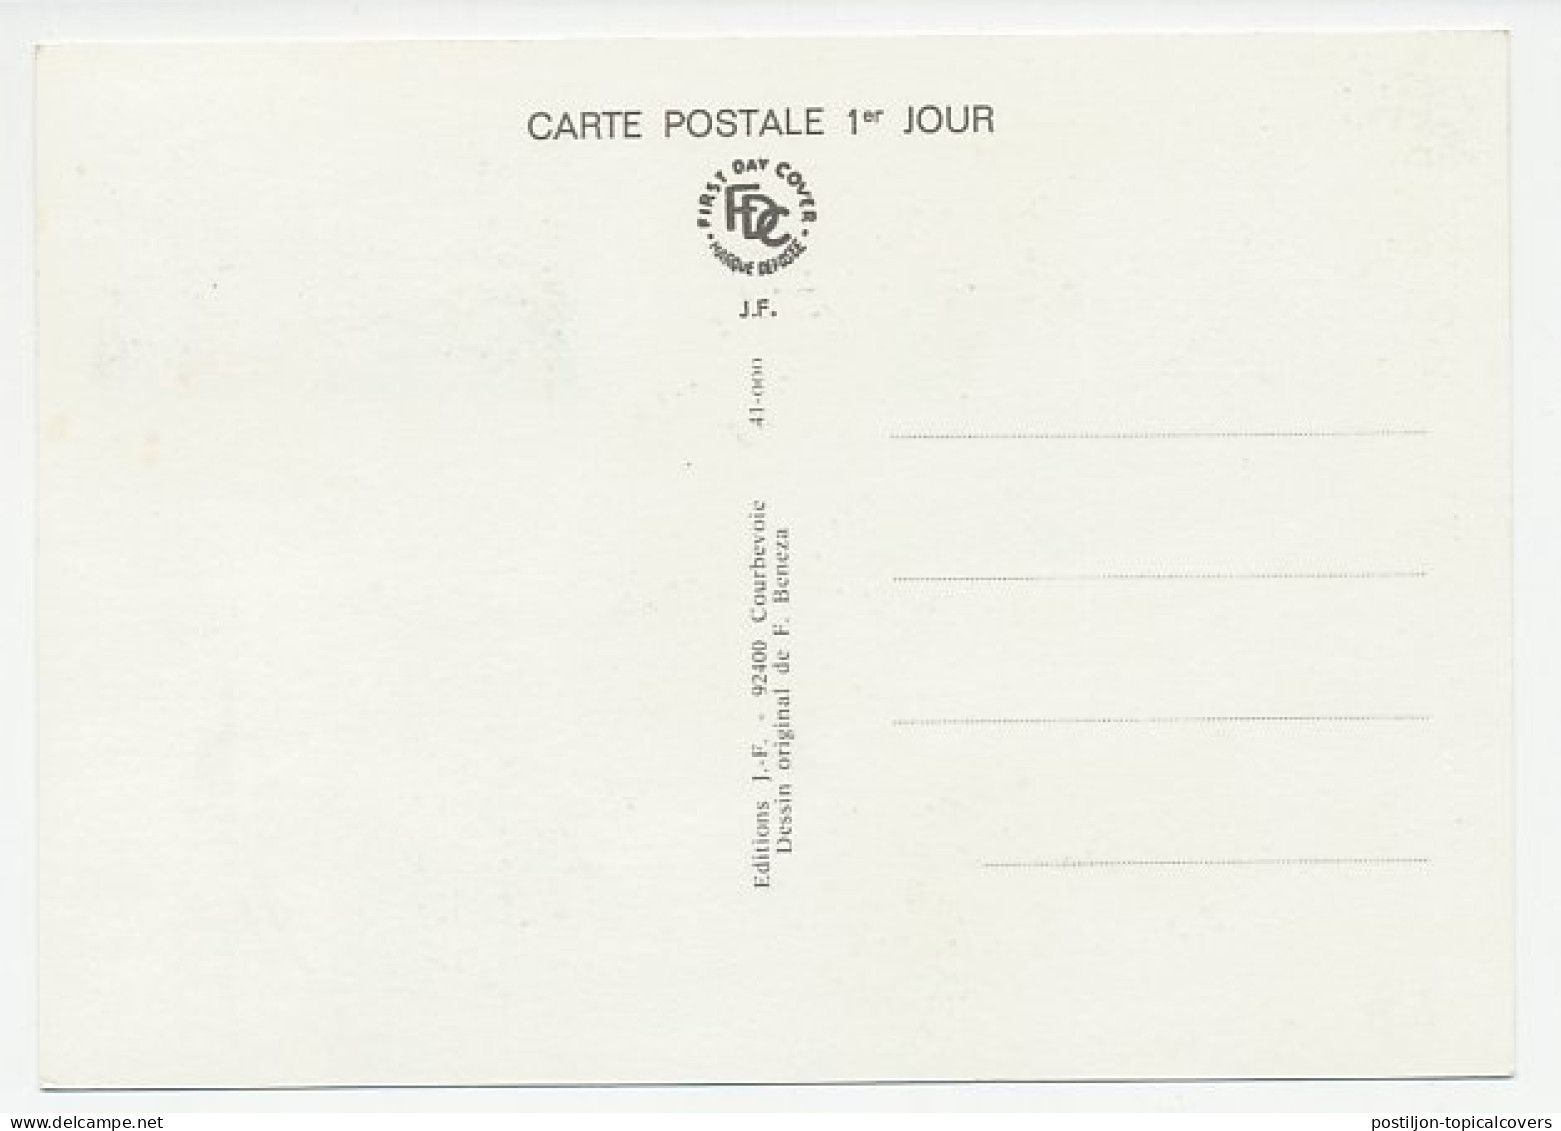 Maximum Card France 1975 Diplomatic Relations France - Soviet Union - Other & Unclassified